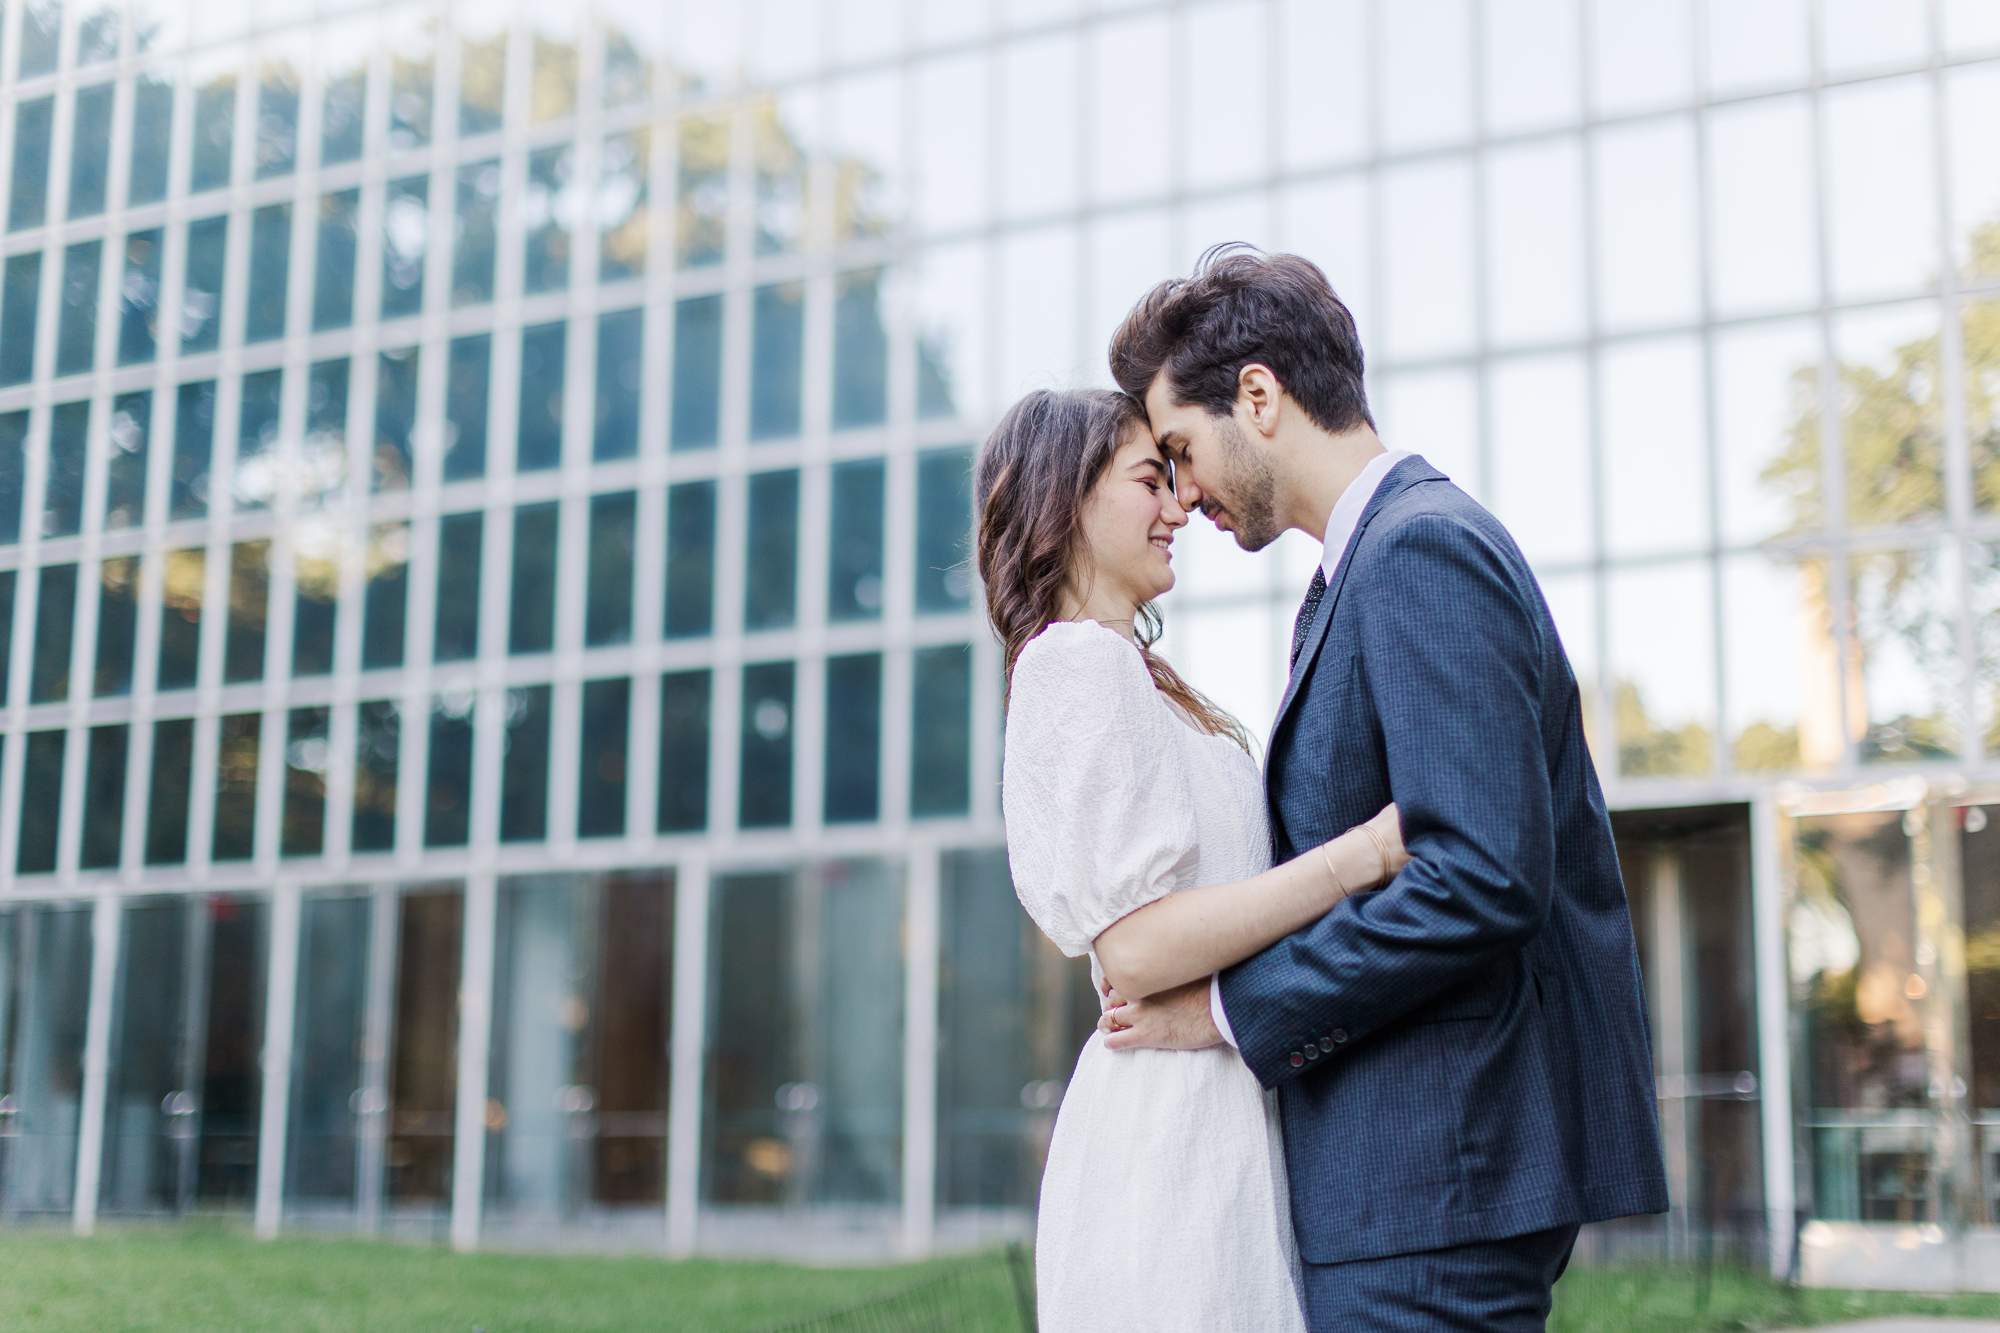 Charming Central Park Engagement Photos in NYC